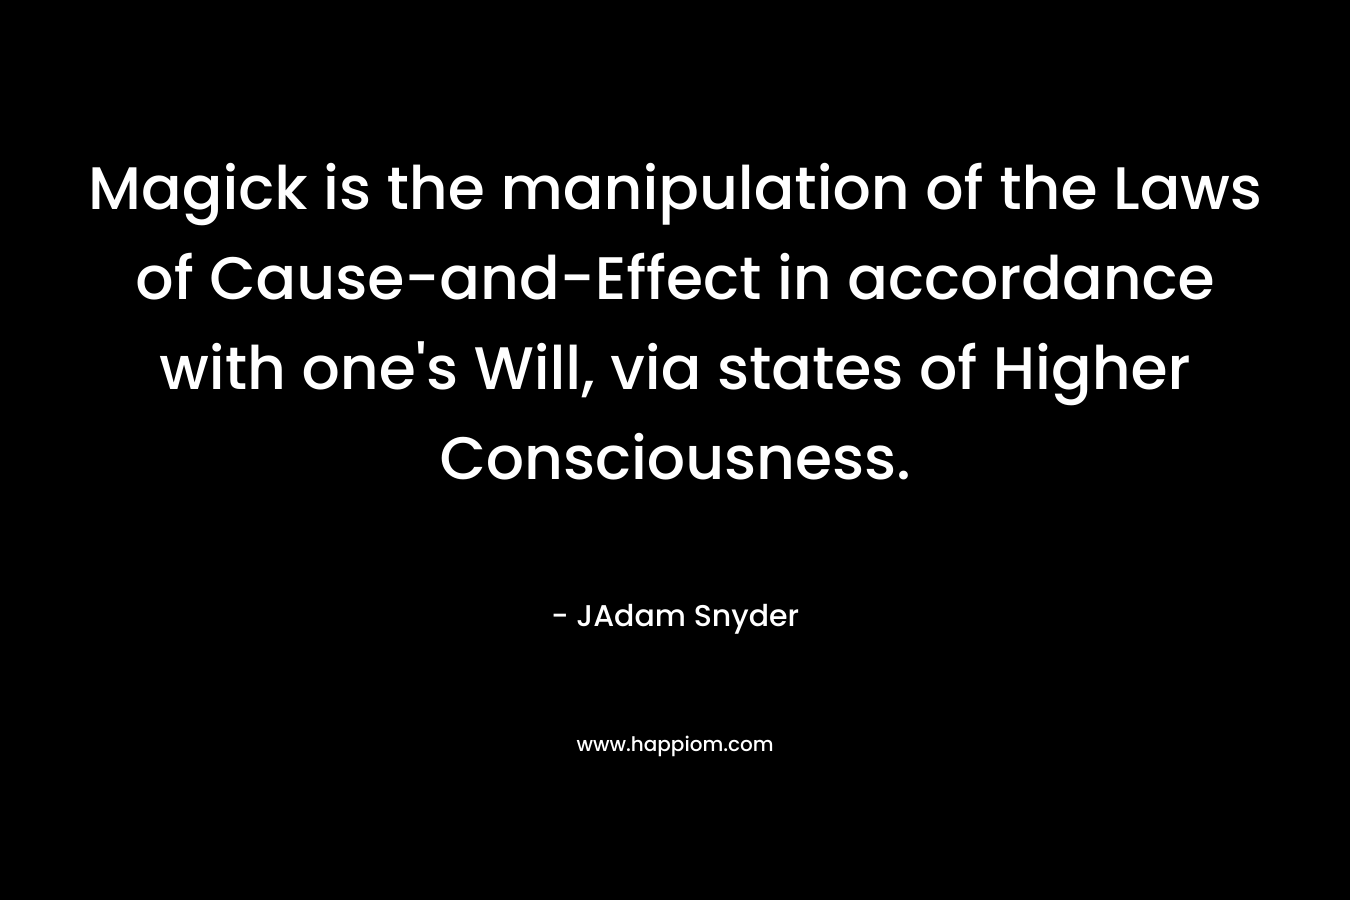 Magick is the manipulation of the Laws of Cause-and-Effect in accordance with one’s Will, via states of Higher Consciousness. – JAdam Snyder